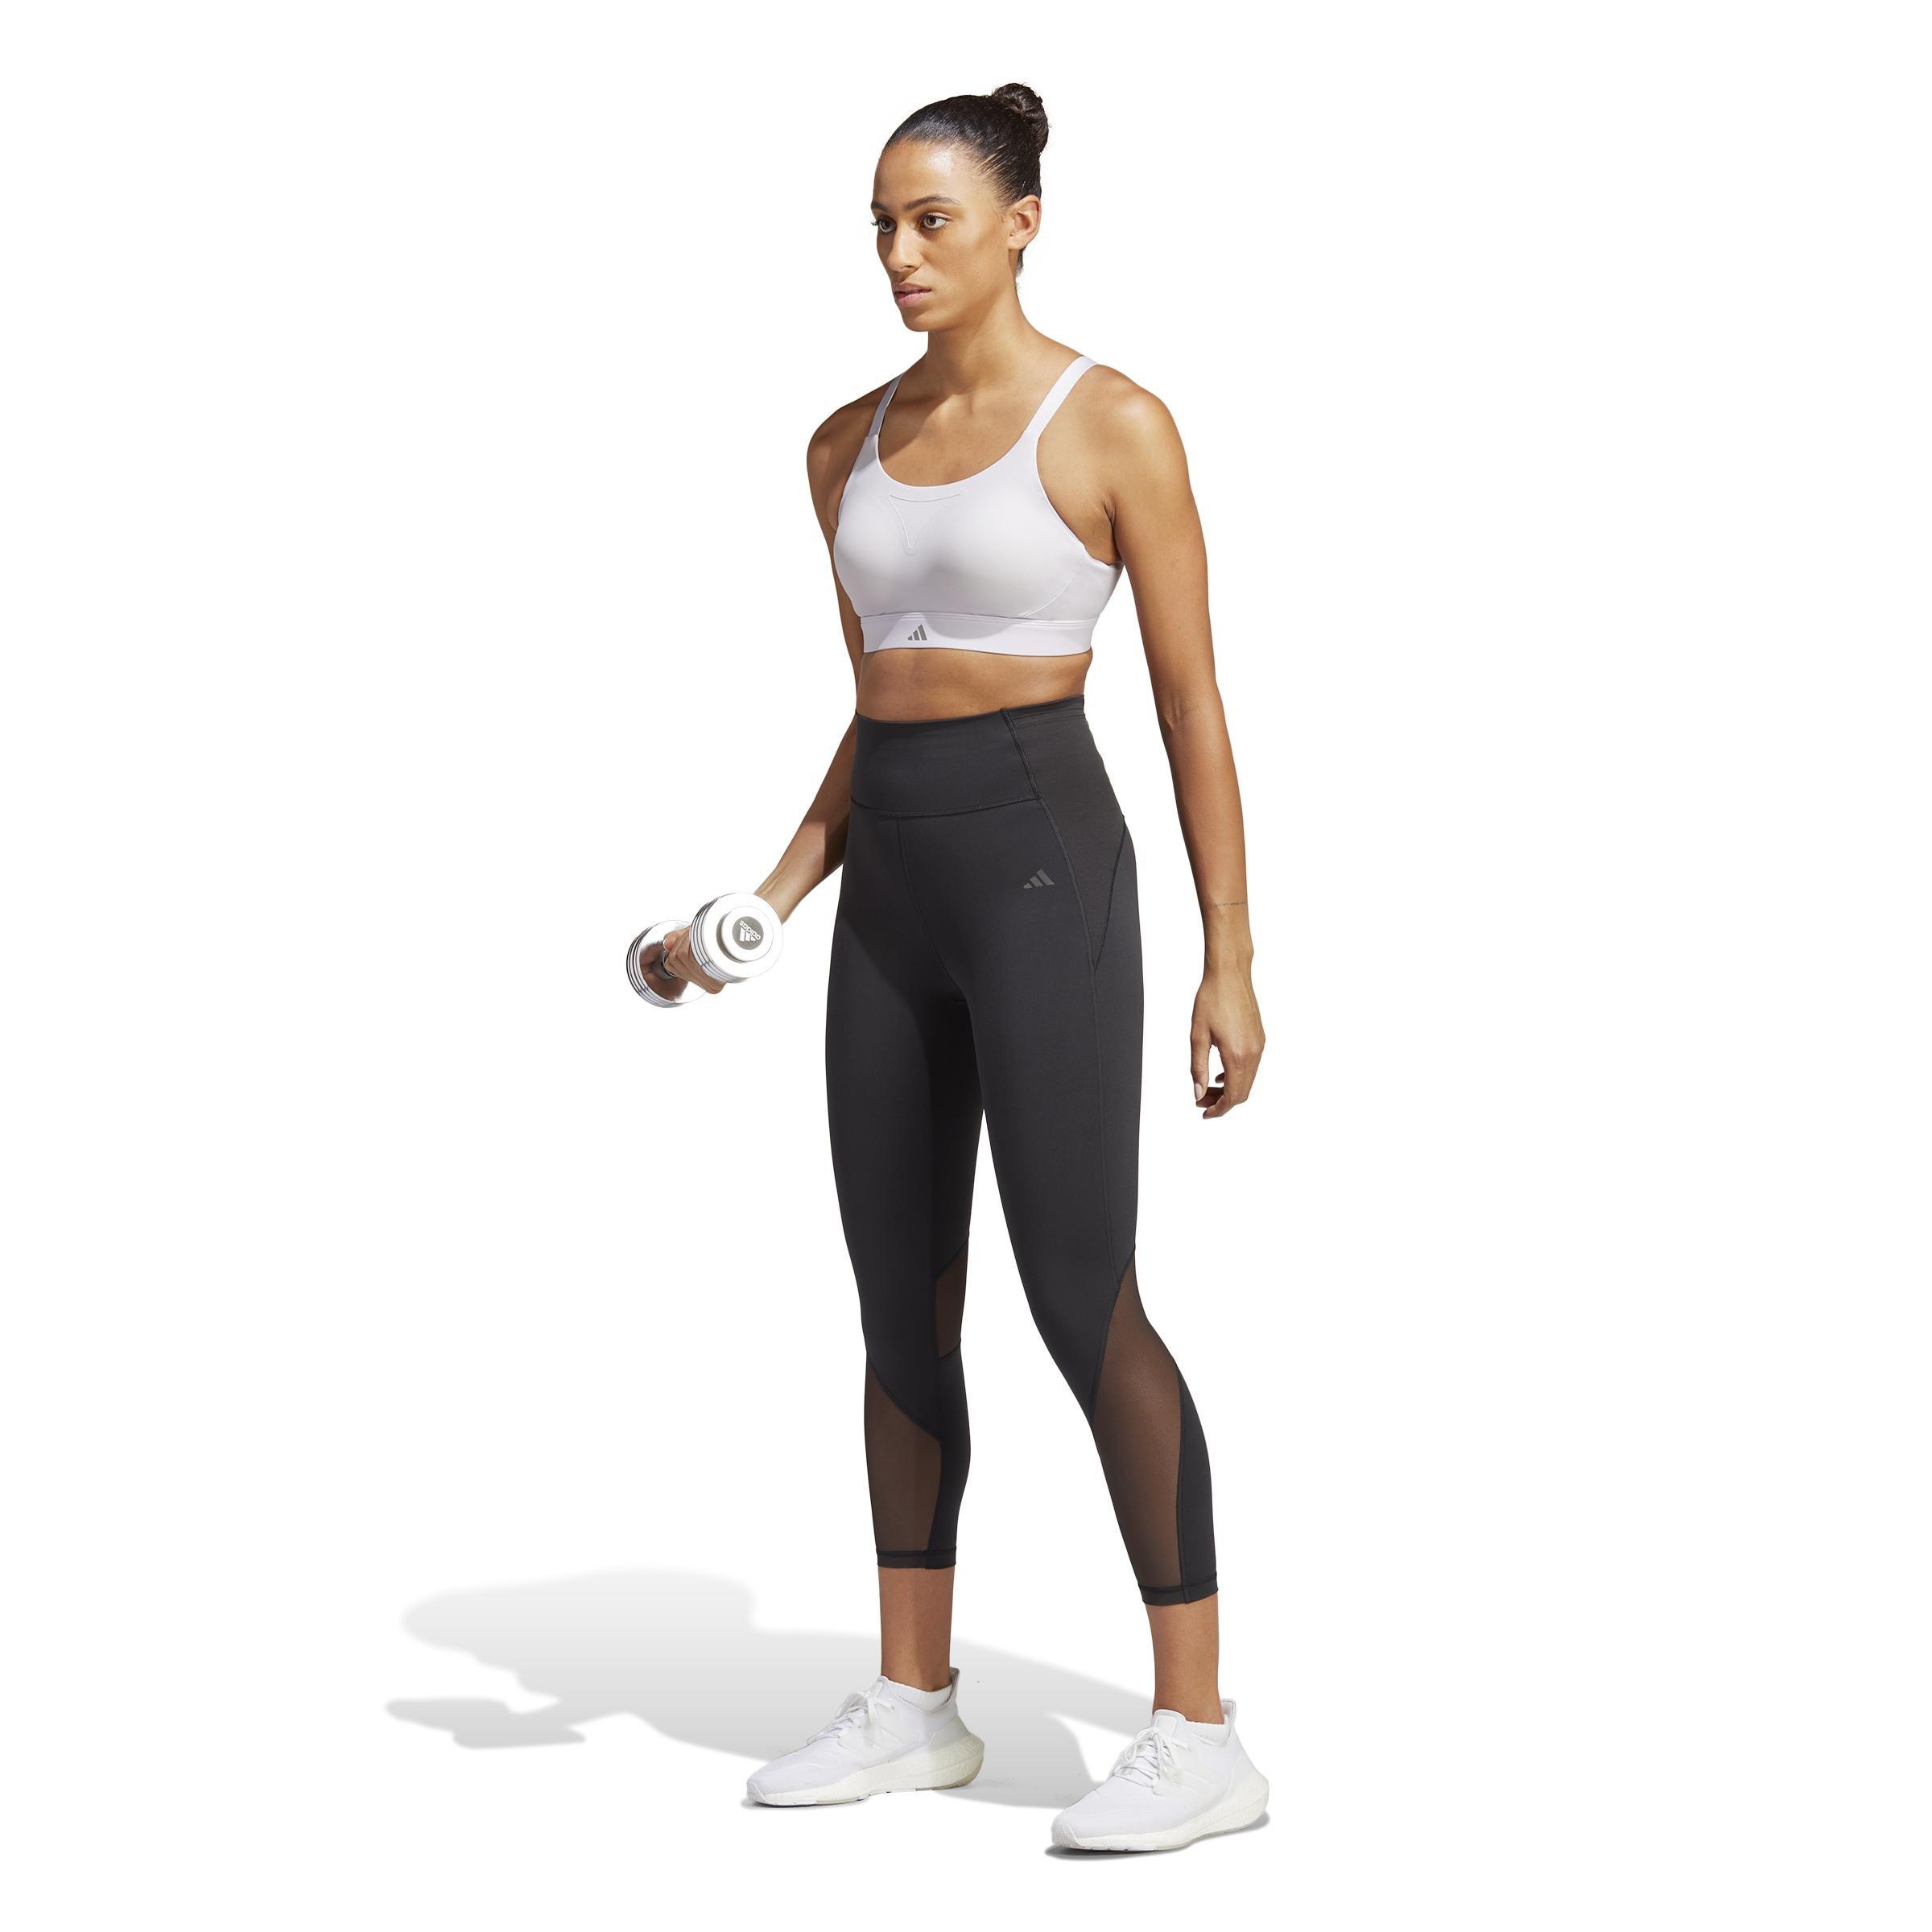 Shop Adidas Leggings & Tights For Women Online in Lebanon, 30-80% OFF